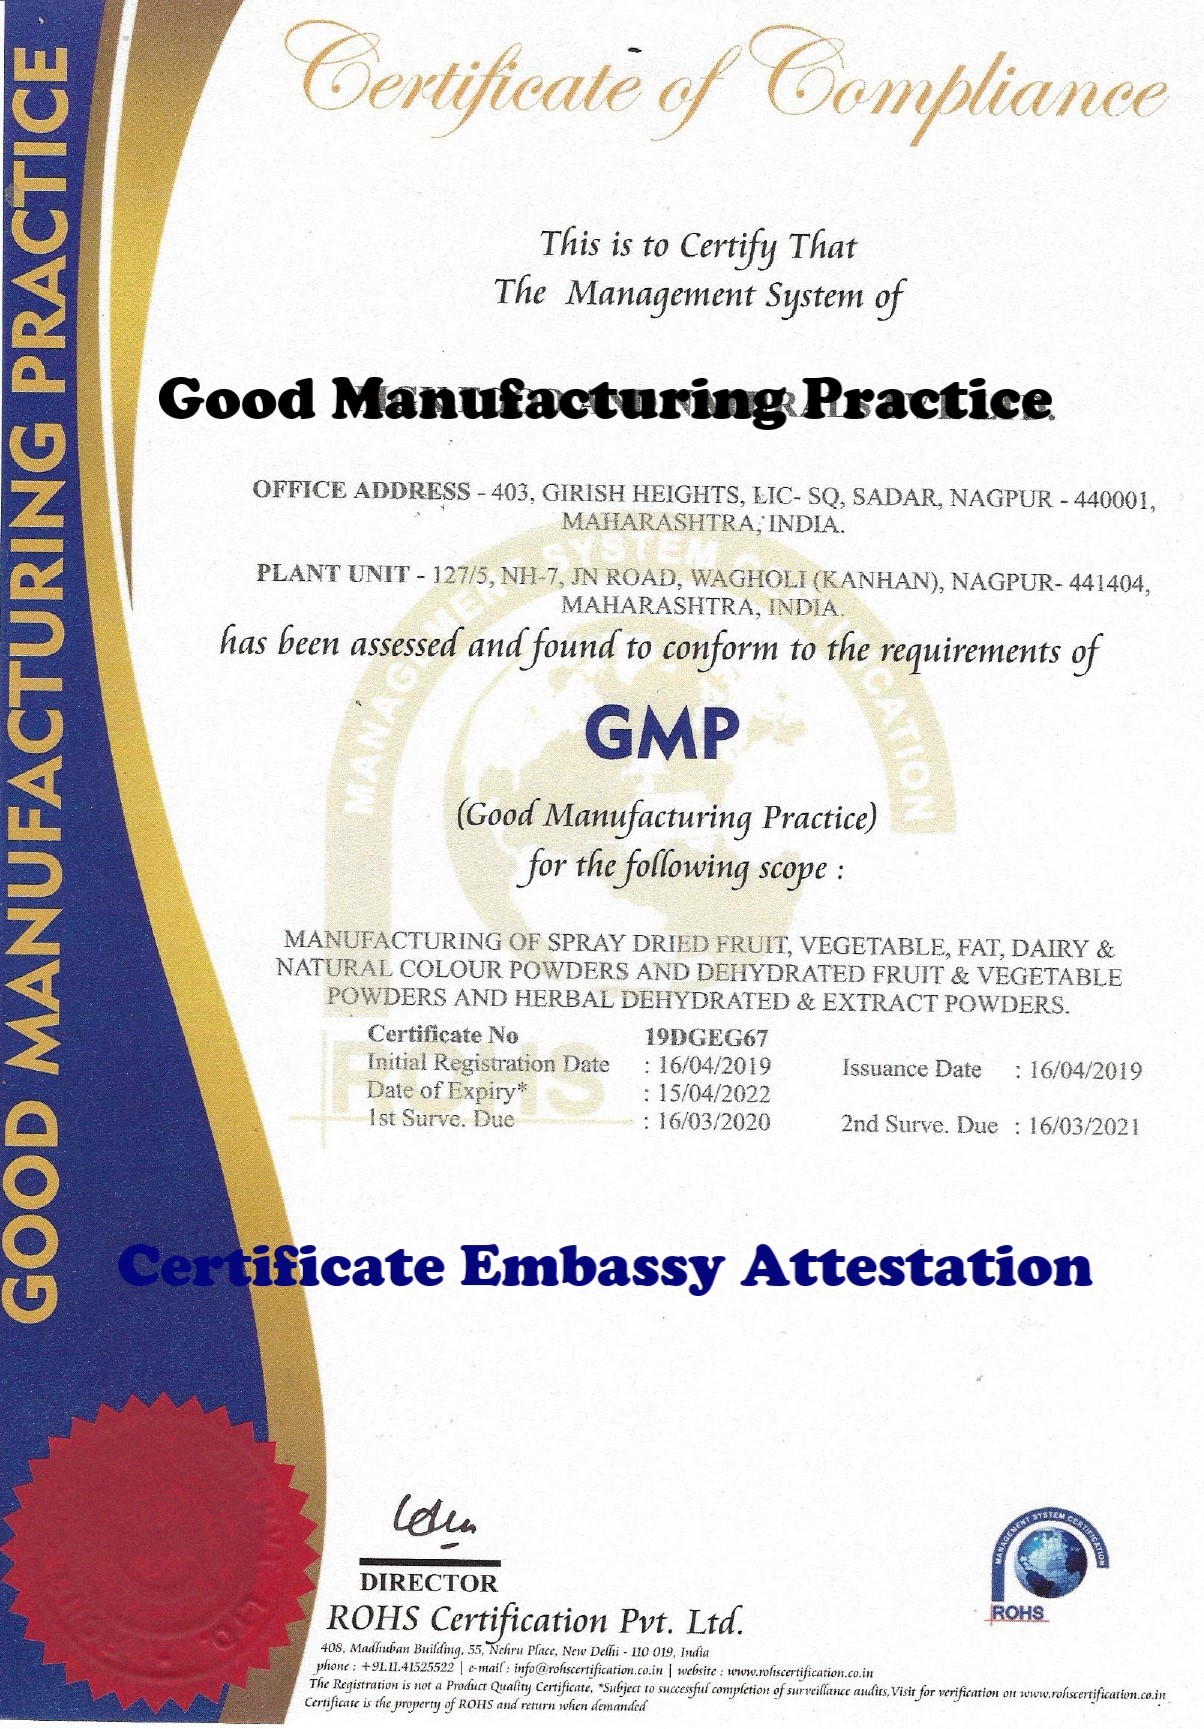 GMP Certificate Attestation from Germany Embassy